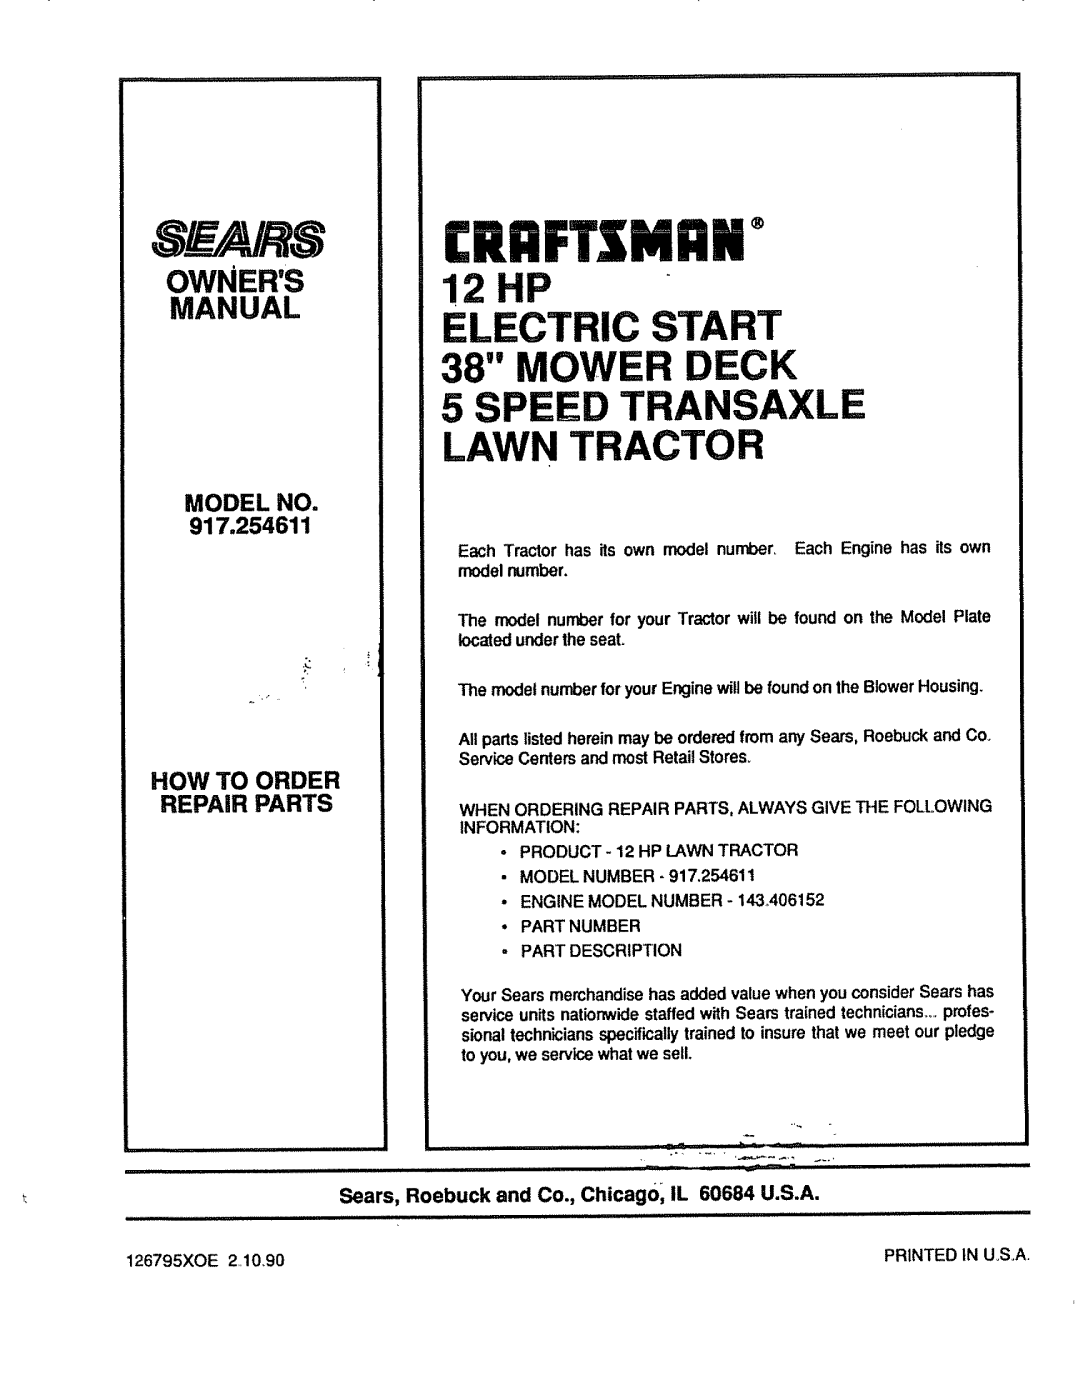 Craftsman 917.254611 £RI:iFTSkiRN, P ELECTRIC START 38 MOWER, Speed Transaxle Lawn Tractor, How To Order Repair Parts 